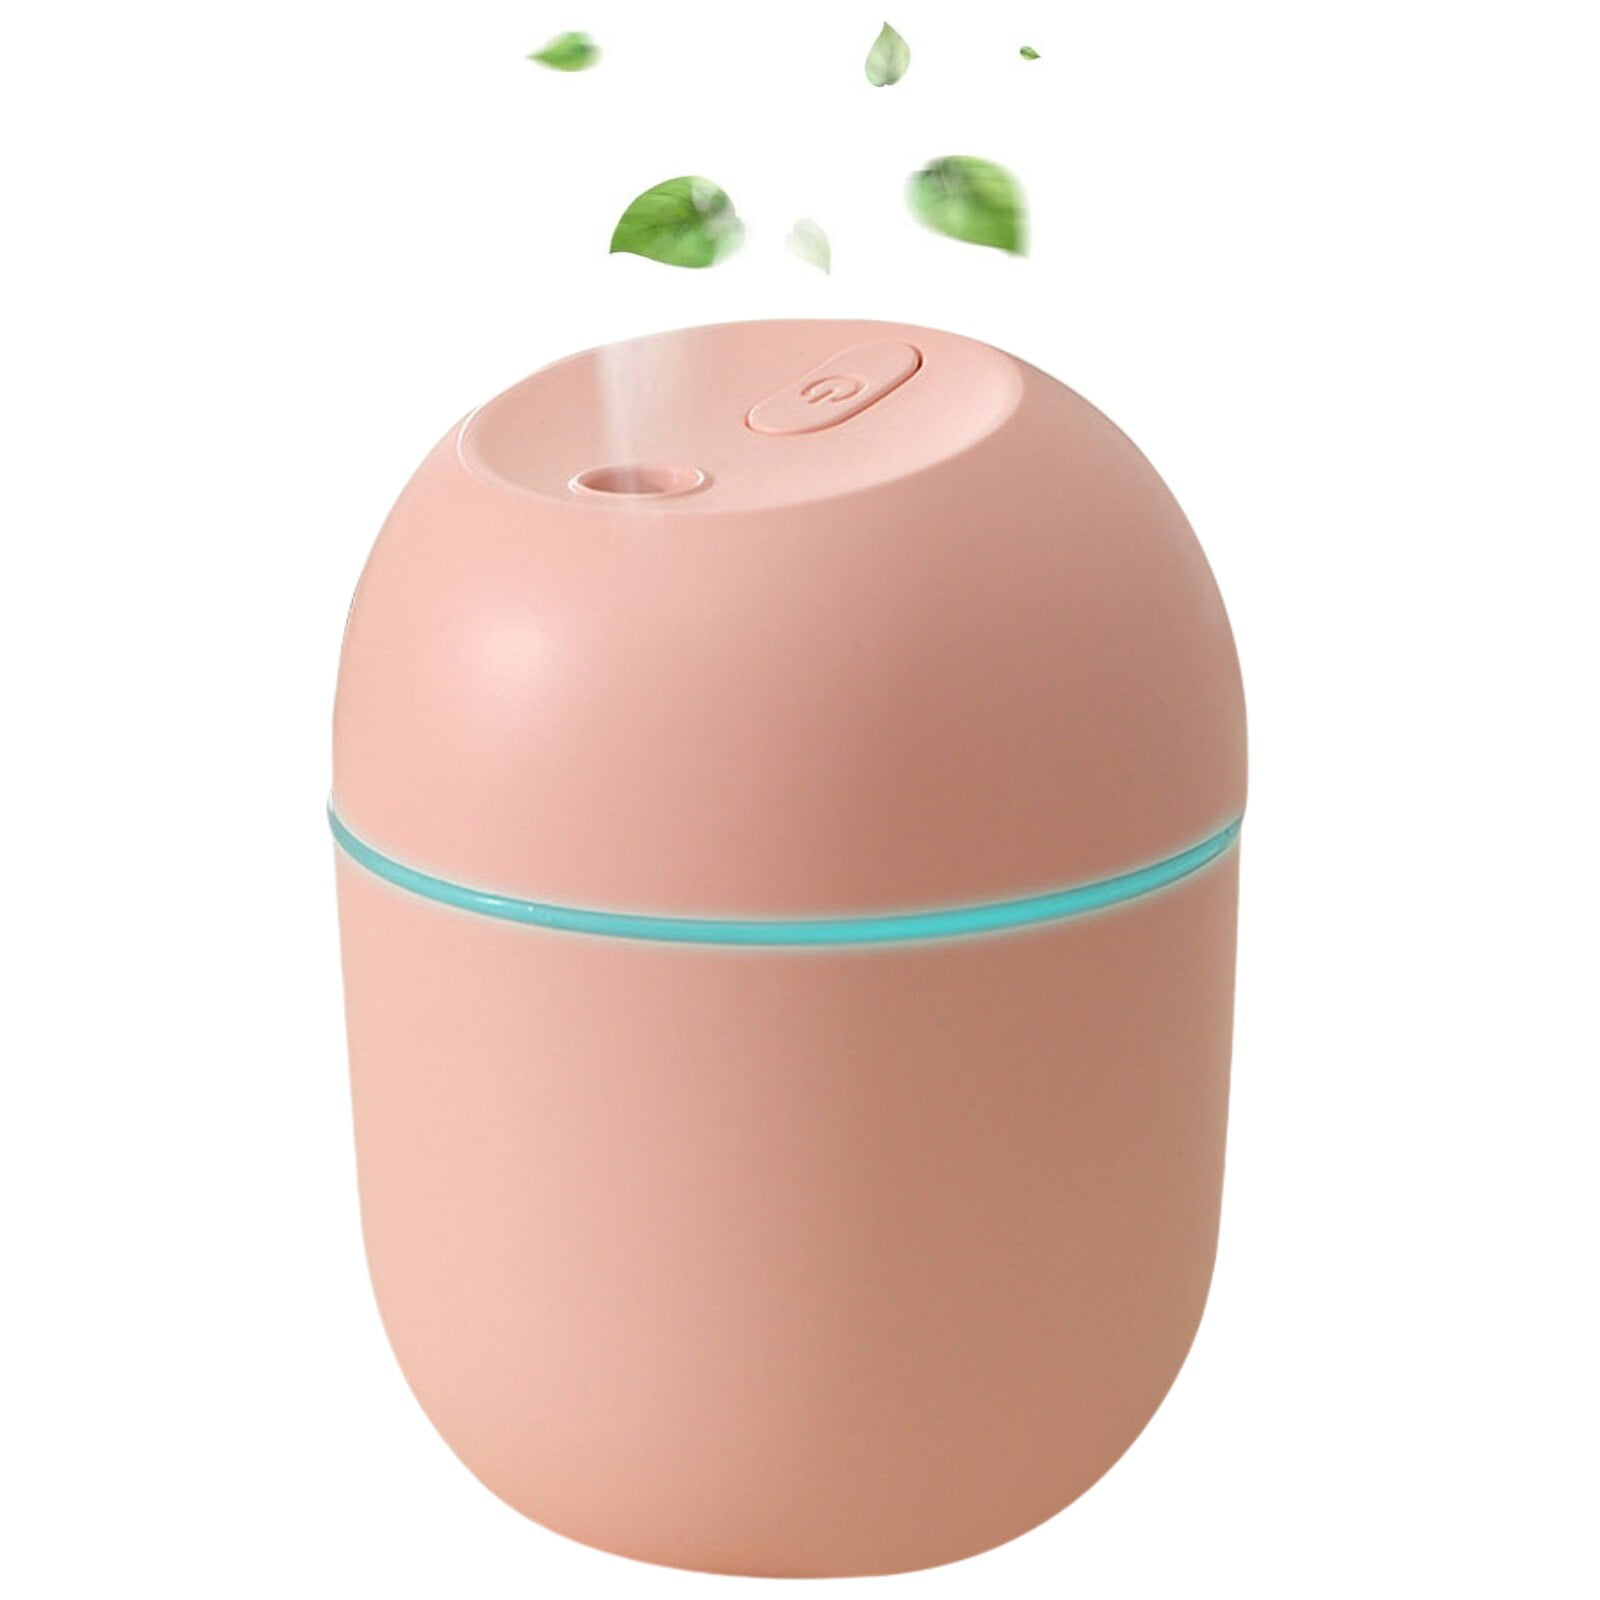 SHENGXINY Kitchen & Dining Home Appliances Clearance Usb Humidifier With  Colorful Lights ,Quiet Cool Mist Humidifier For Bedroom And Office ,Plants